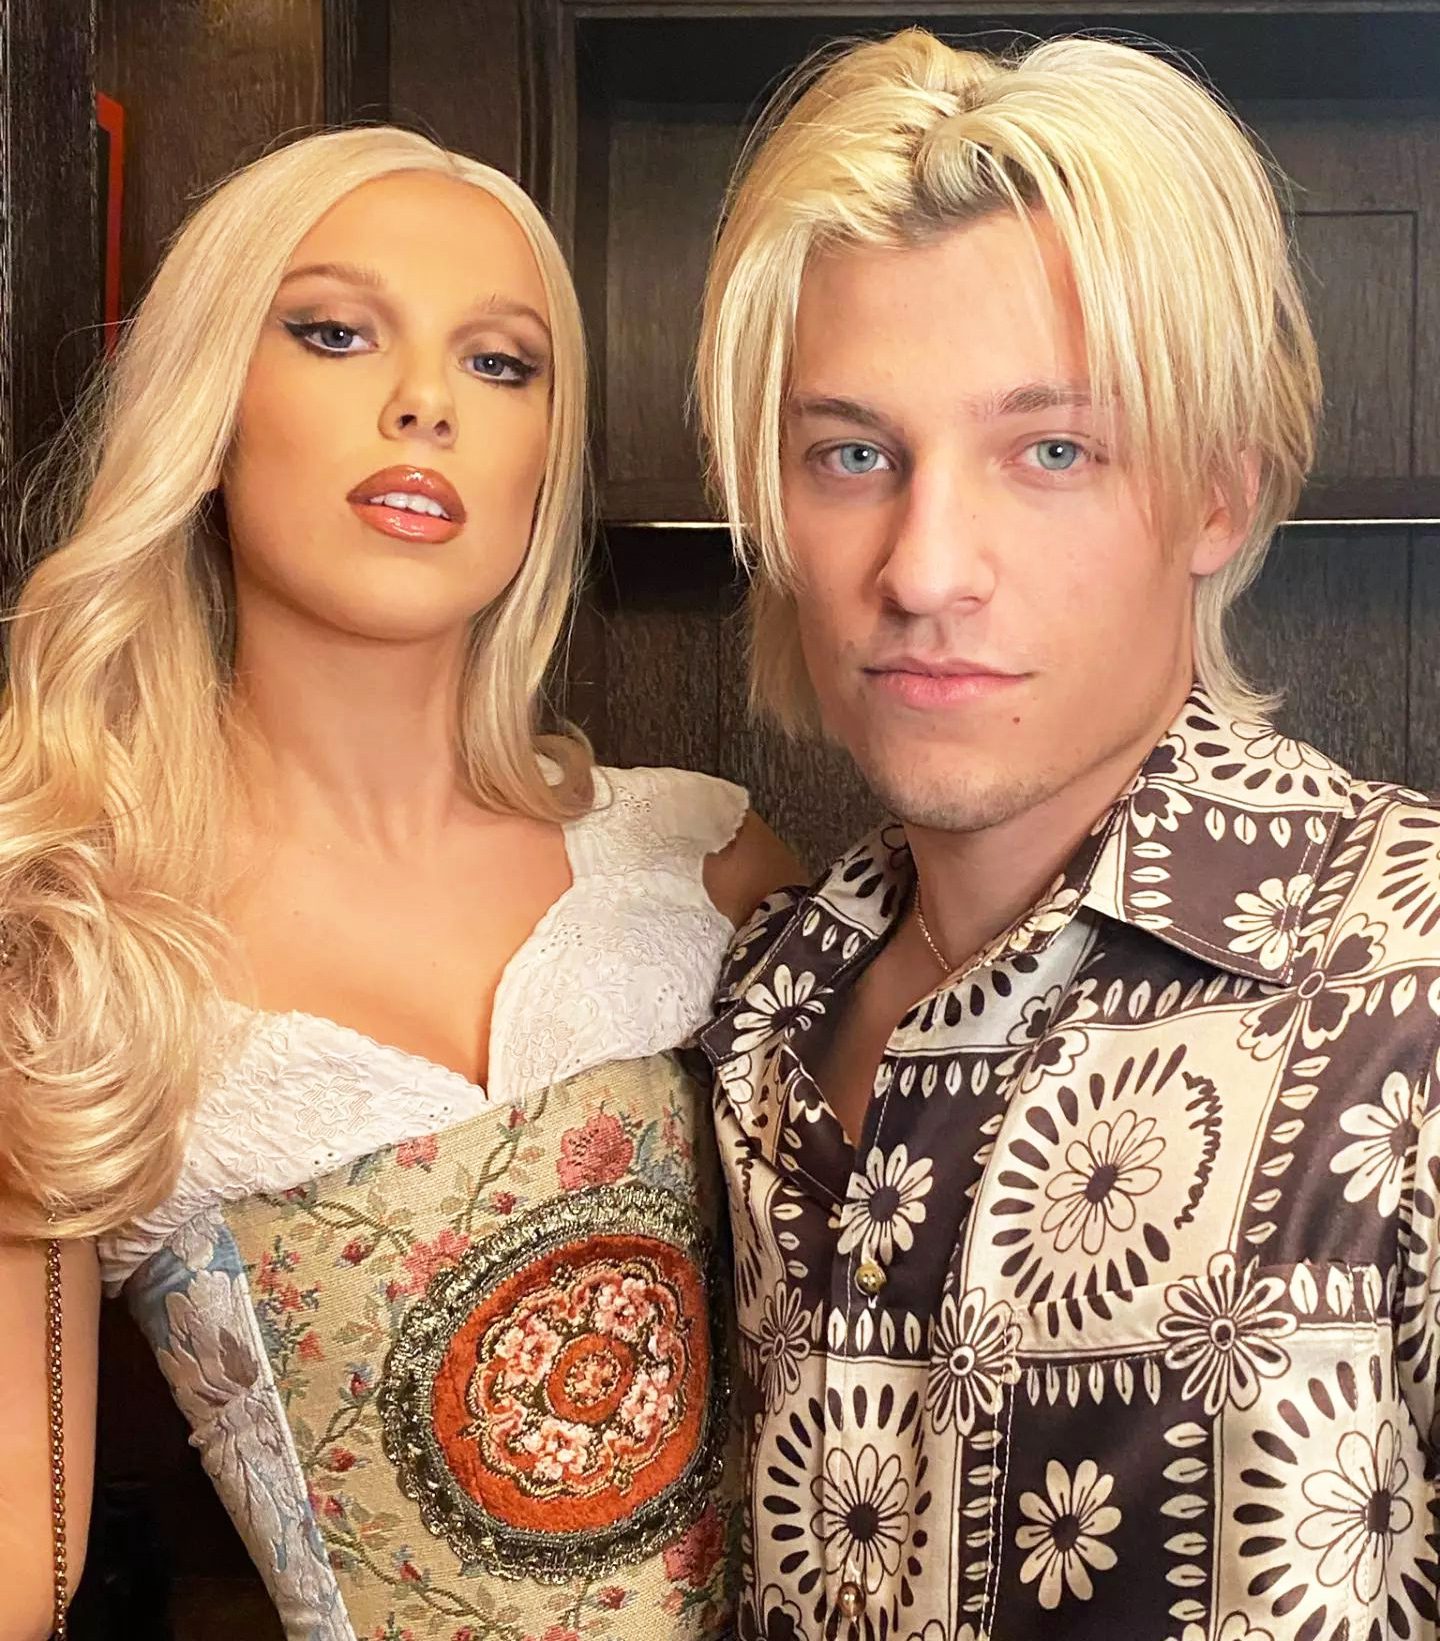 Brown and Bongiovi as Ken and Barbie on Instagram.